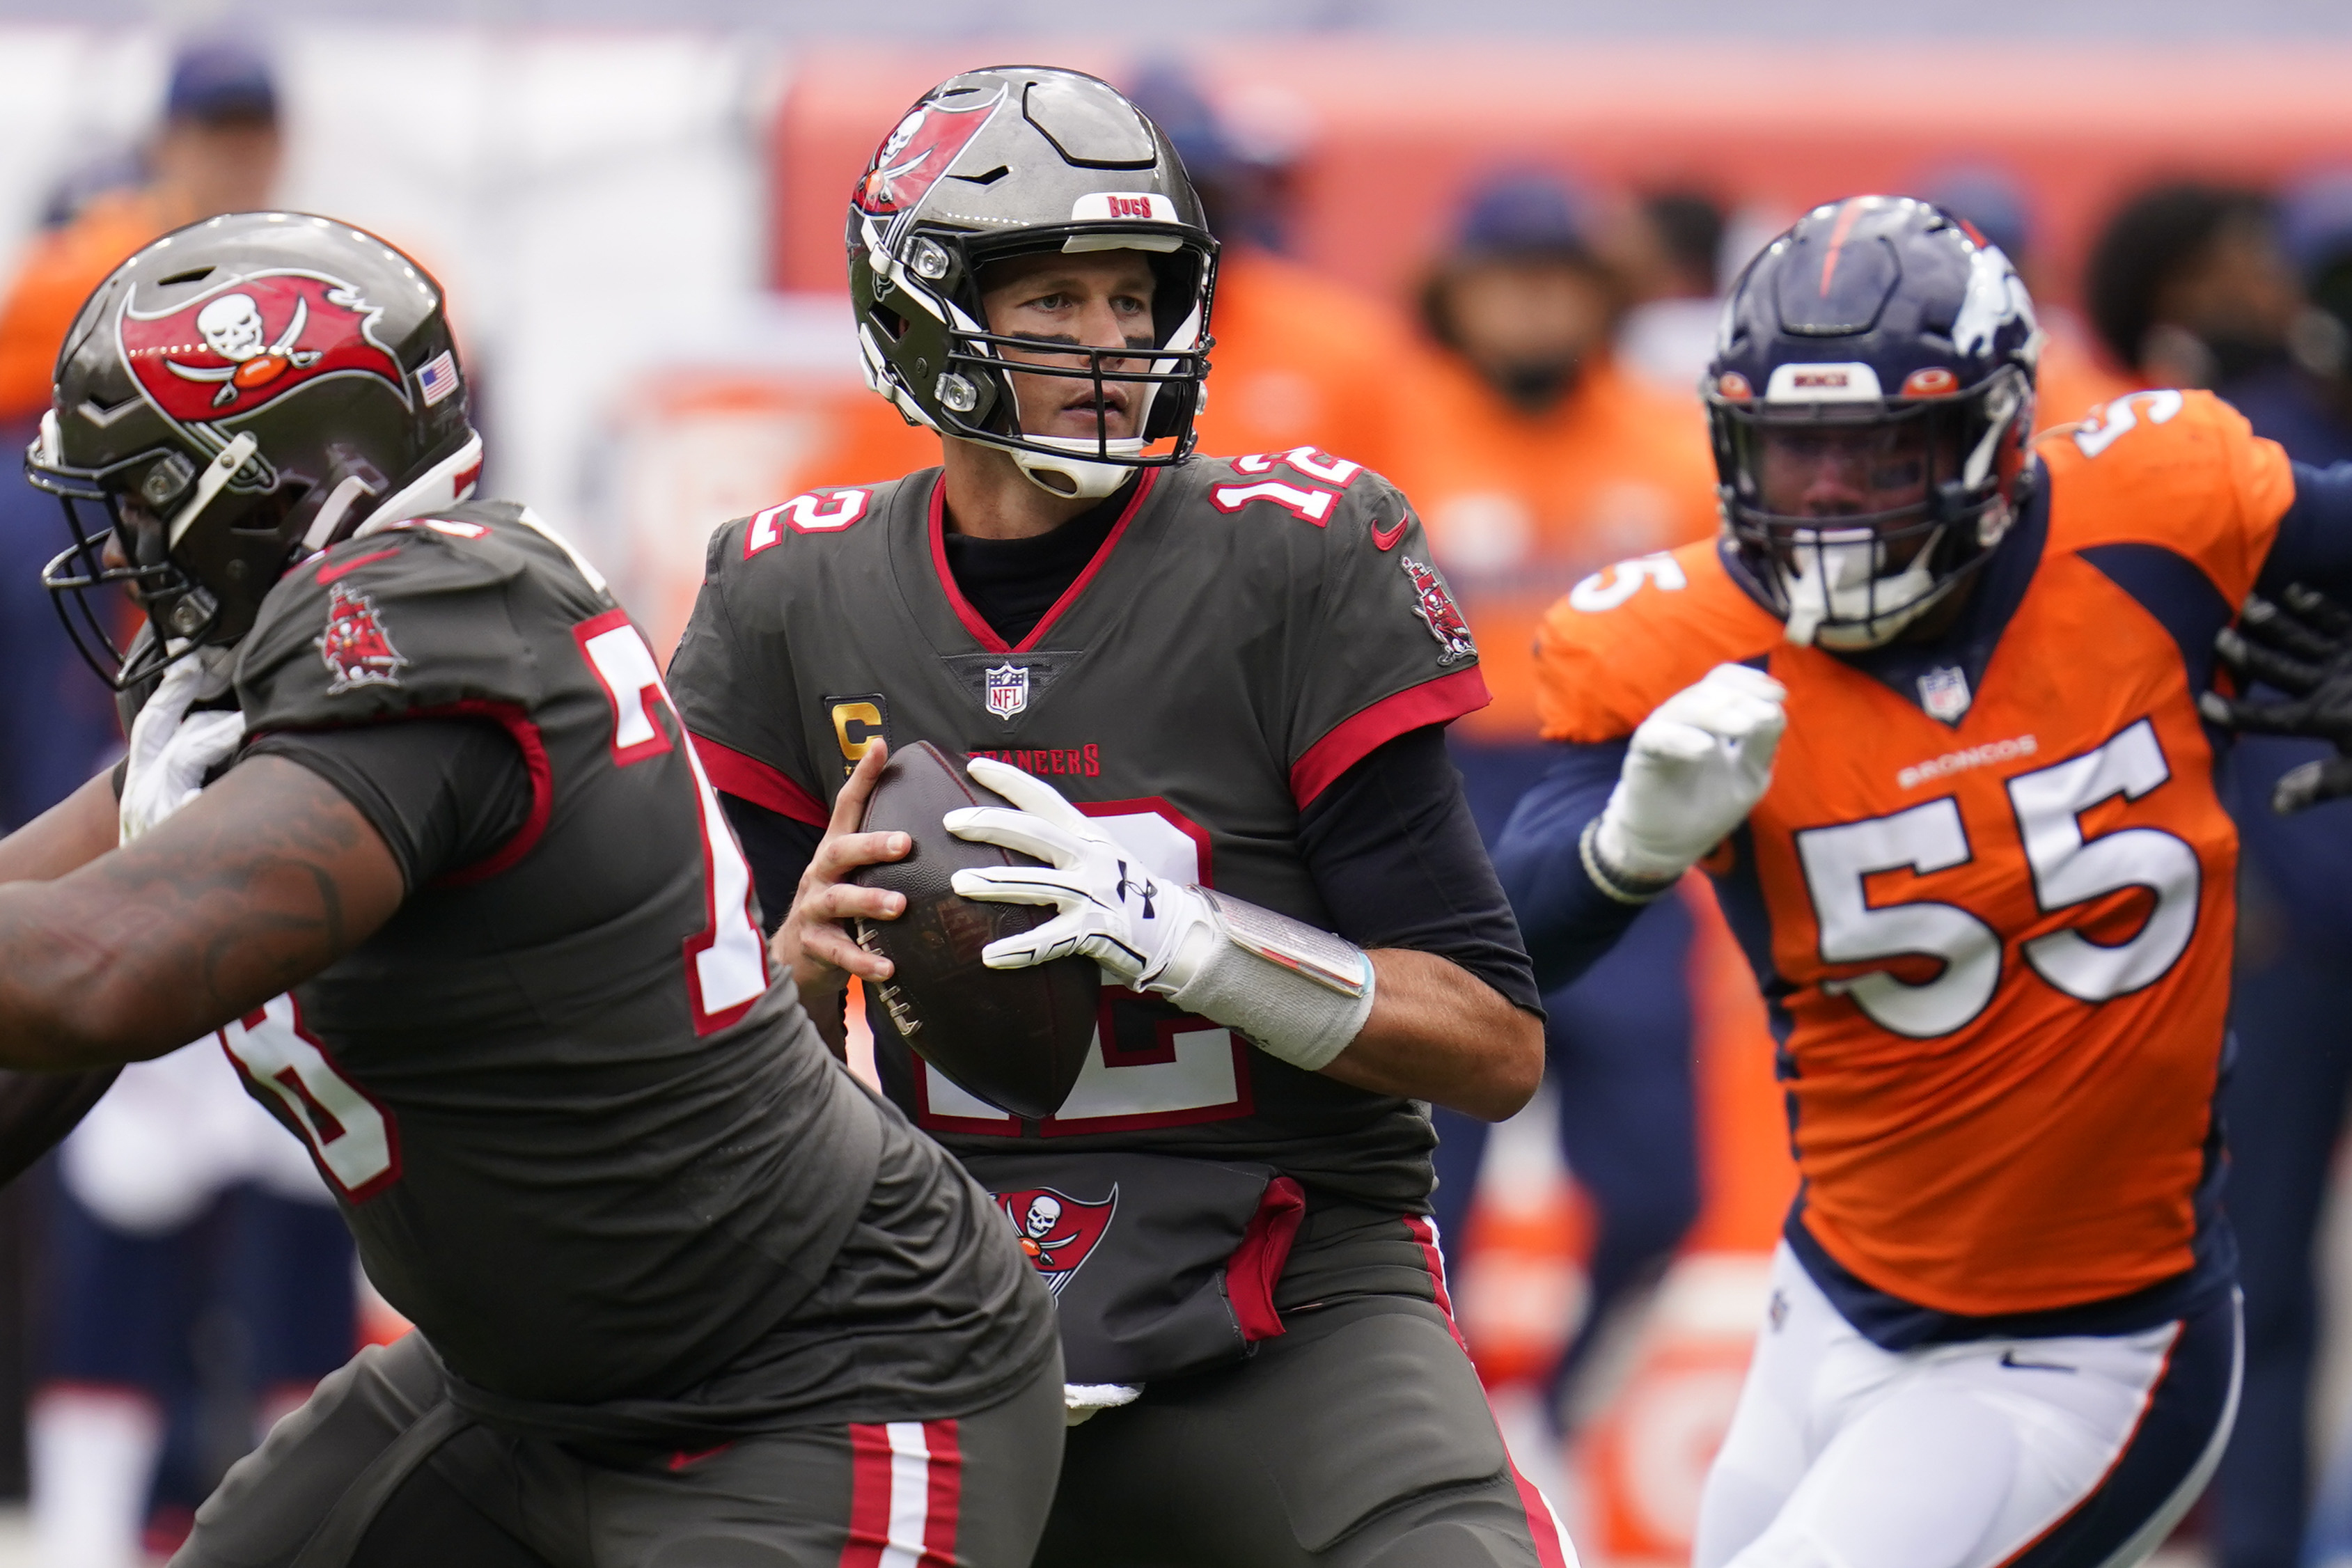 Paul Lukas on X: 'For those wondering how the Bucs and Broncos